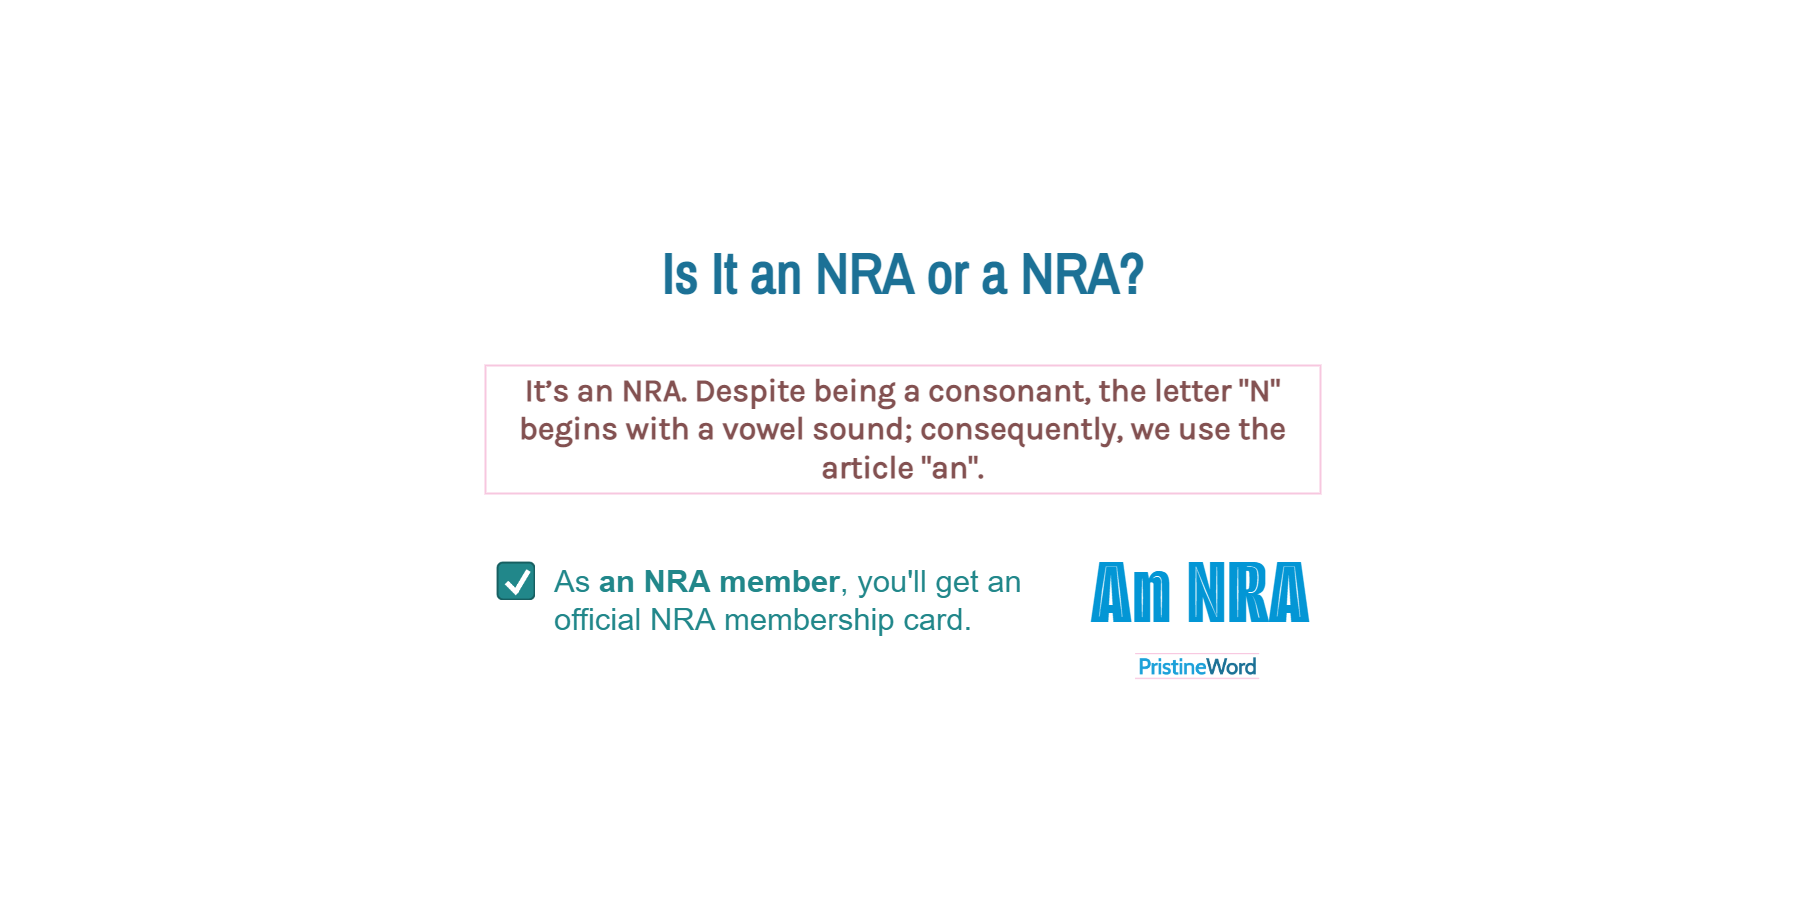 Is It an NRA or a NRA?